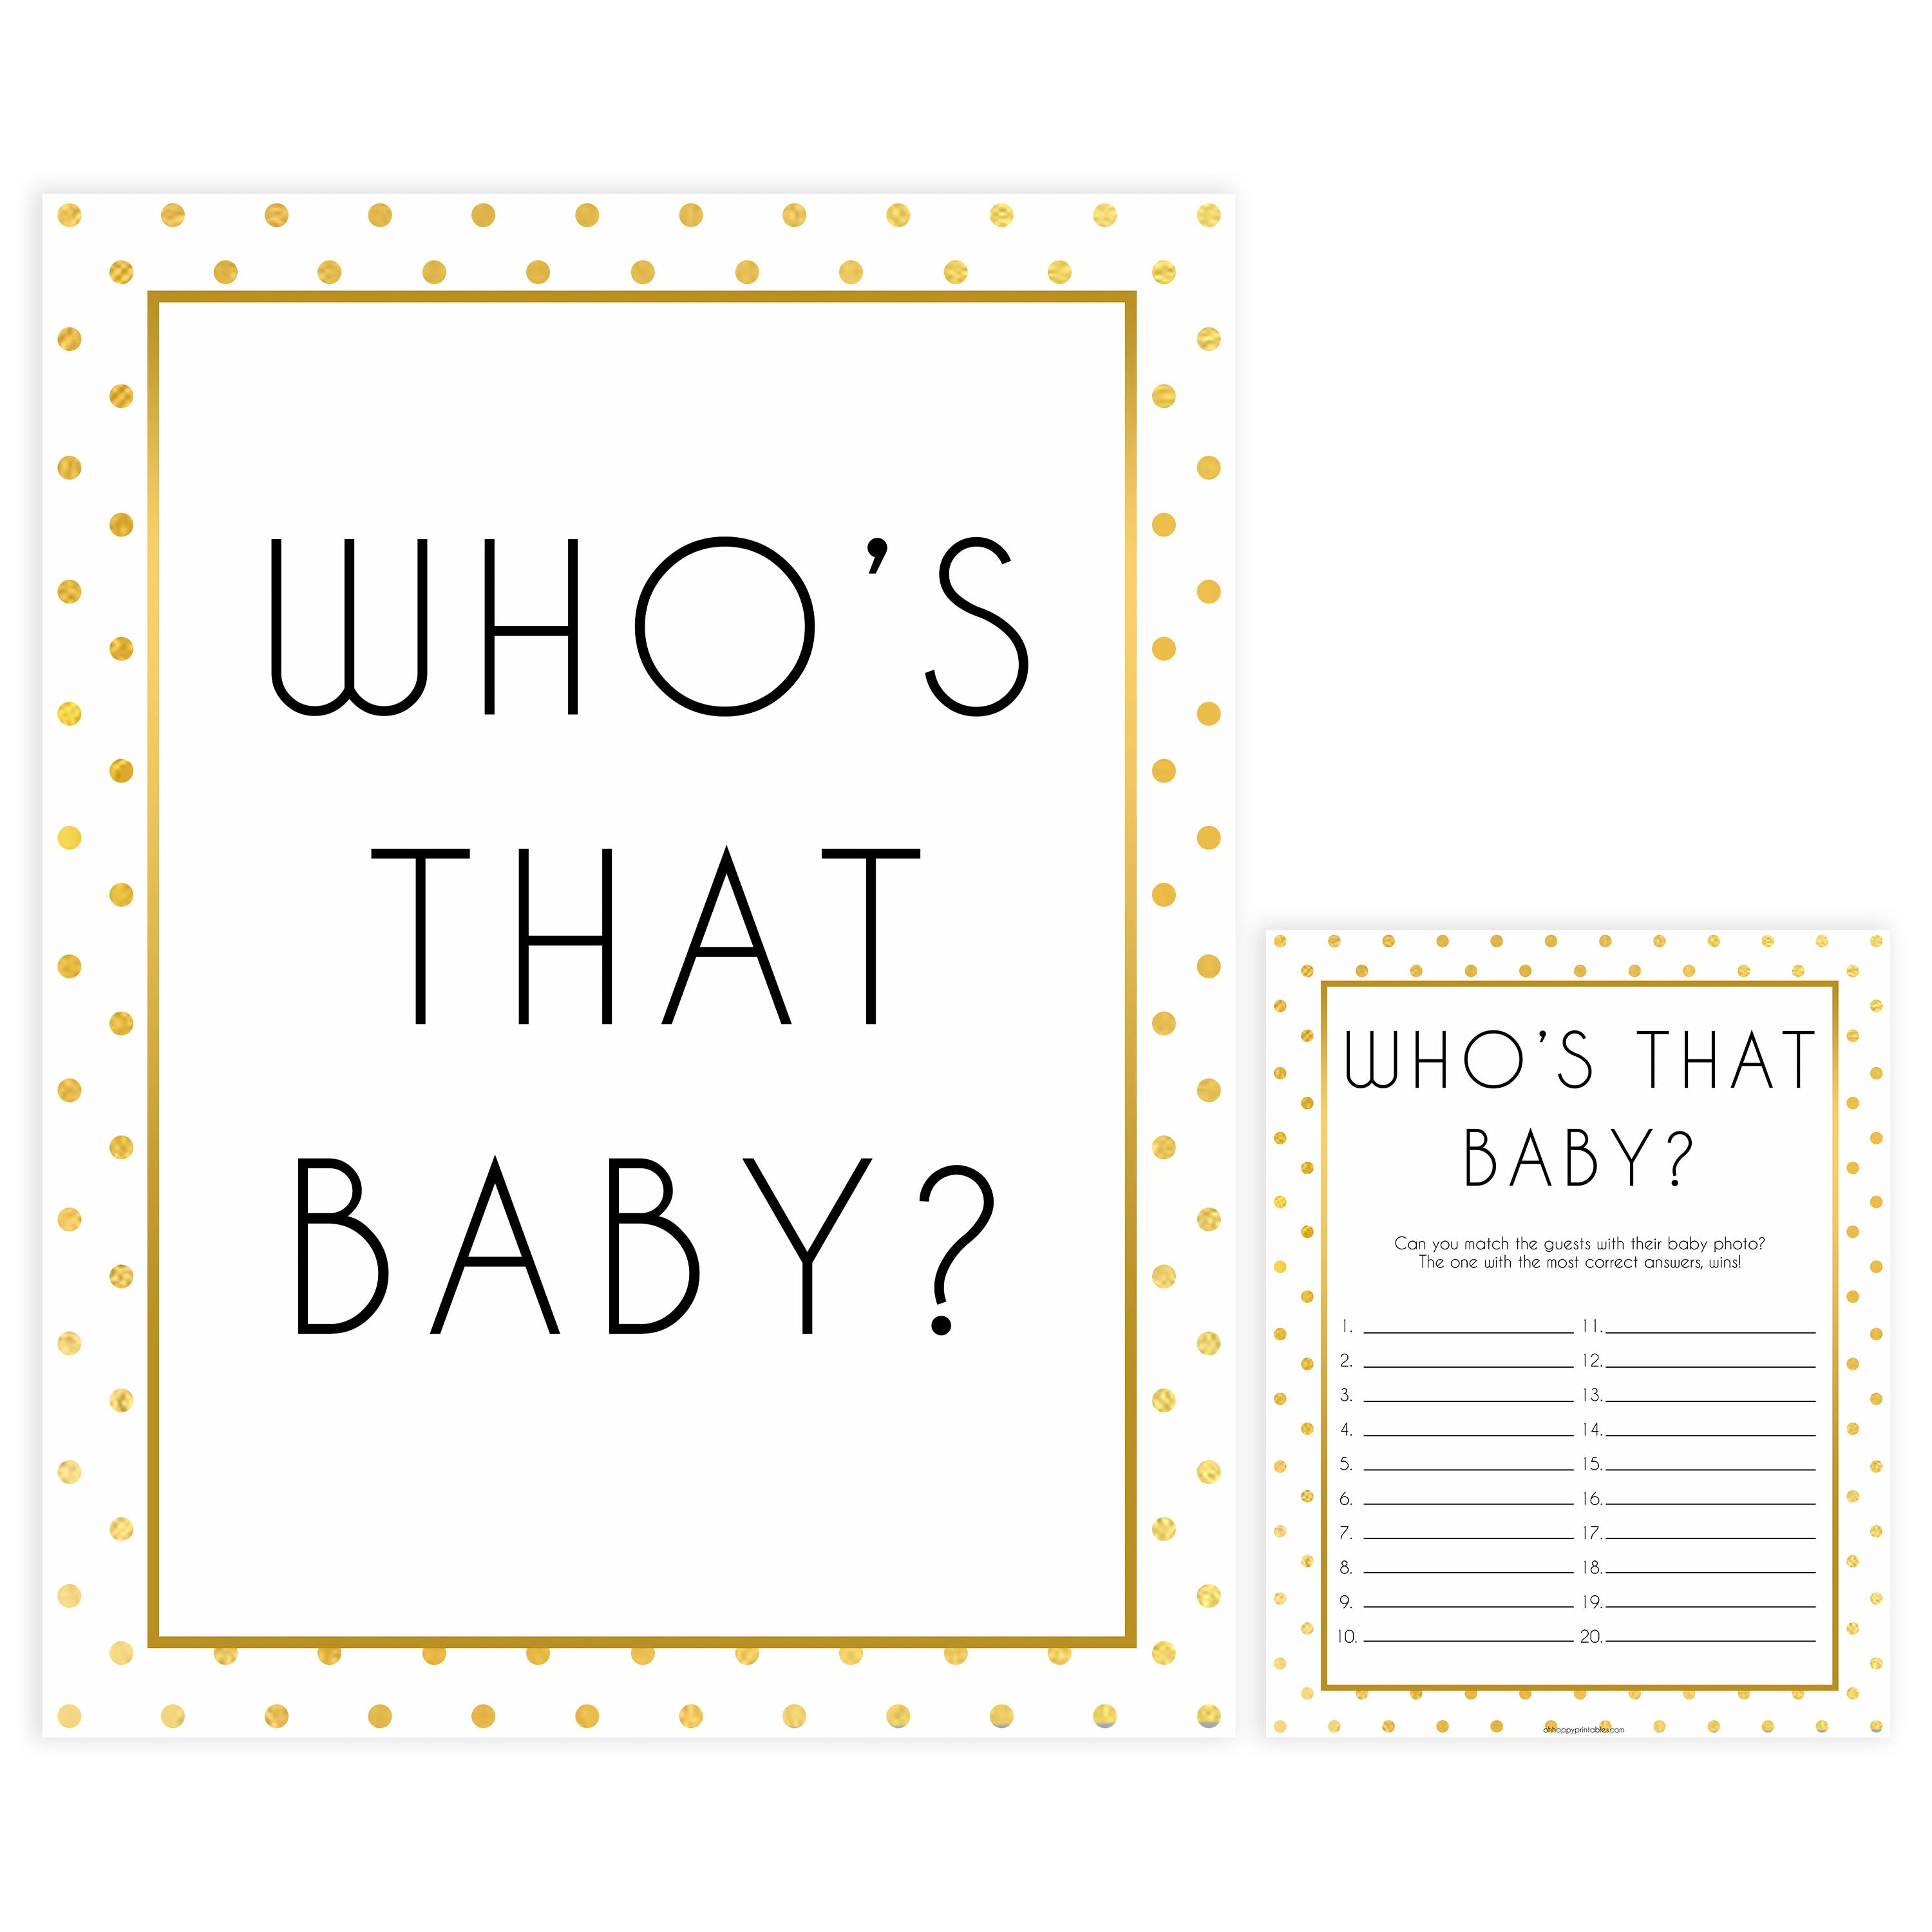 whos that baby game, guess the baby pictures, Printable baby shower games, baby gold dots fun baby games, baby shower games, fun baby shower ideas, top baby shower ideas, gold glitter shower baby shower, friends baby shower ideas